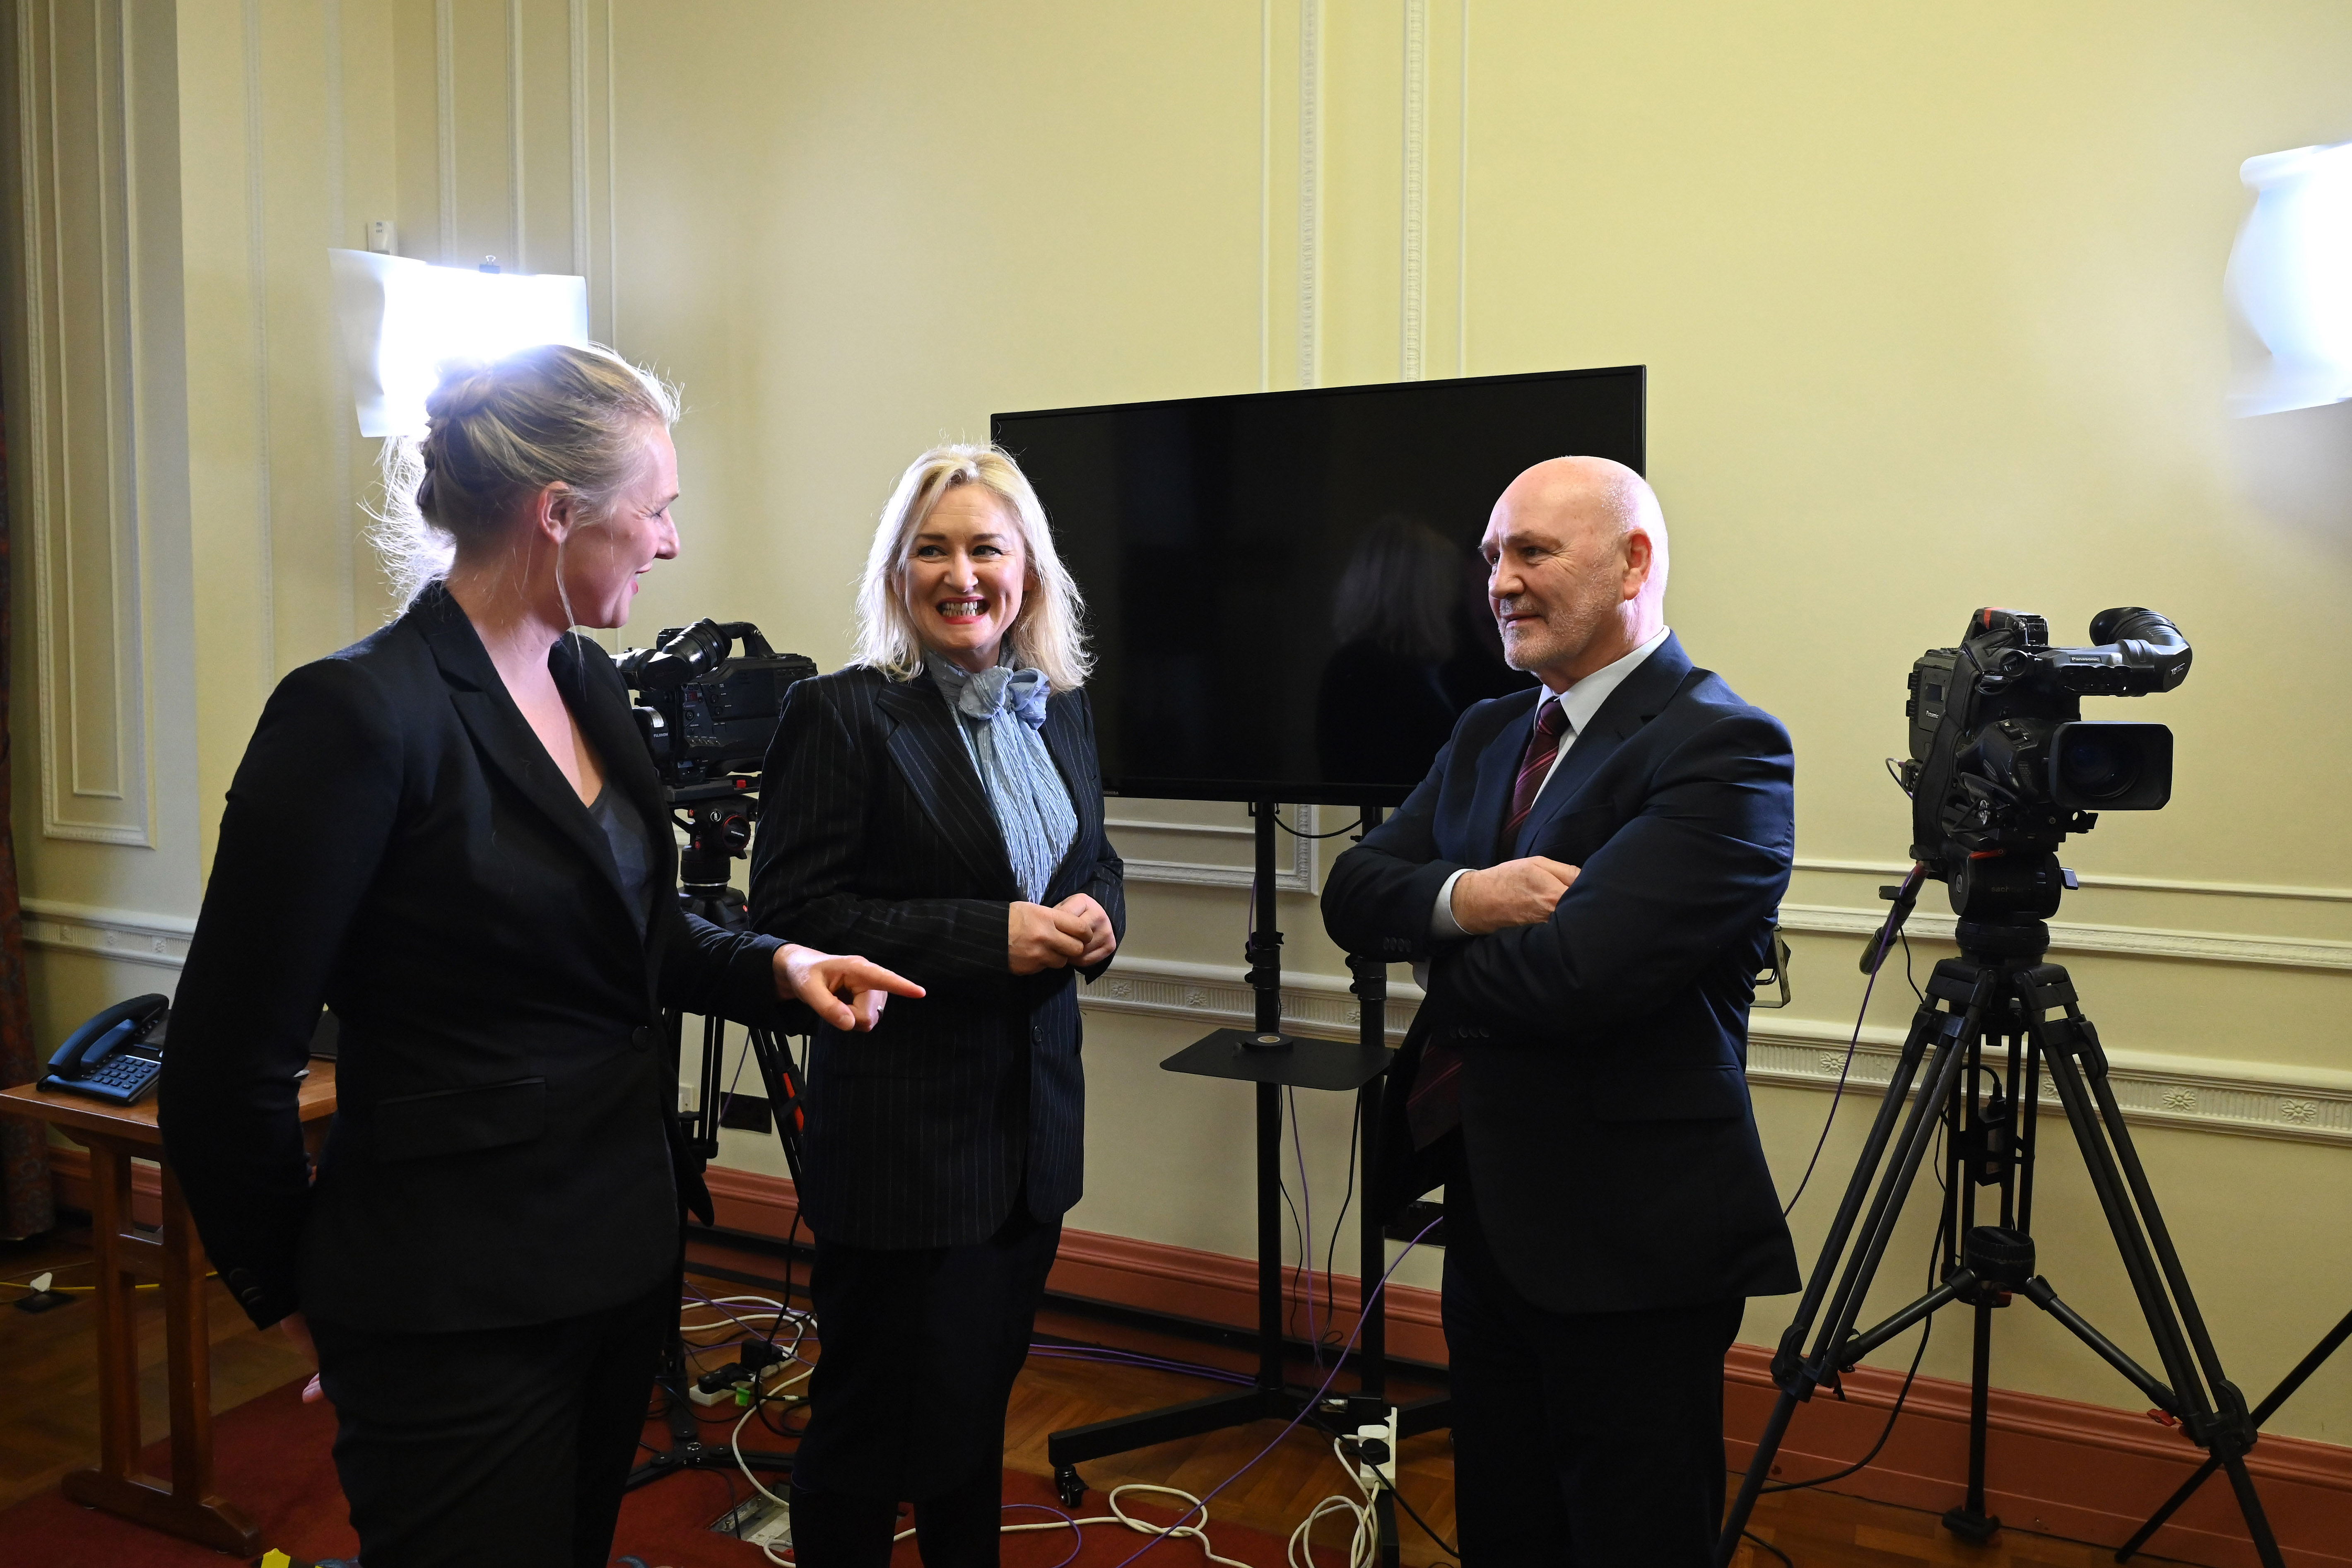 The Speaker of the Northern Ireland Assembly, Alex Maskey MLA discusses the new Assembly sign language pilot with (L-R) Kristina Laverty, British Sign Language (BSL) Interpreter and Amanda Coogan, Irish Sign Language (ISL) Interpreter. 